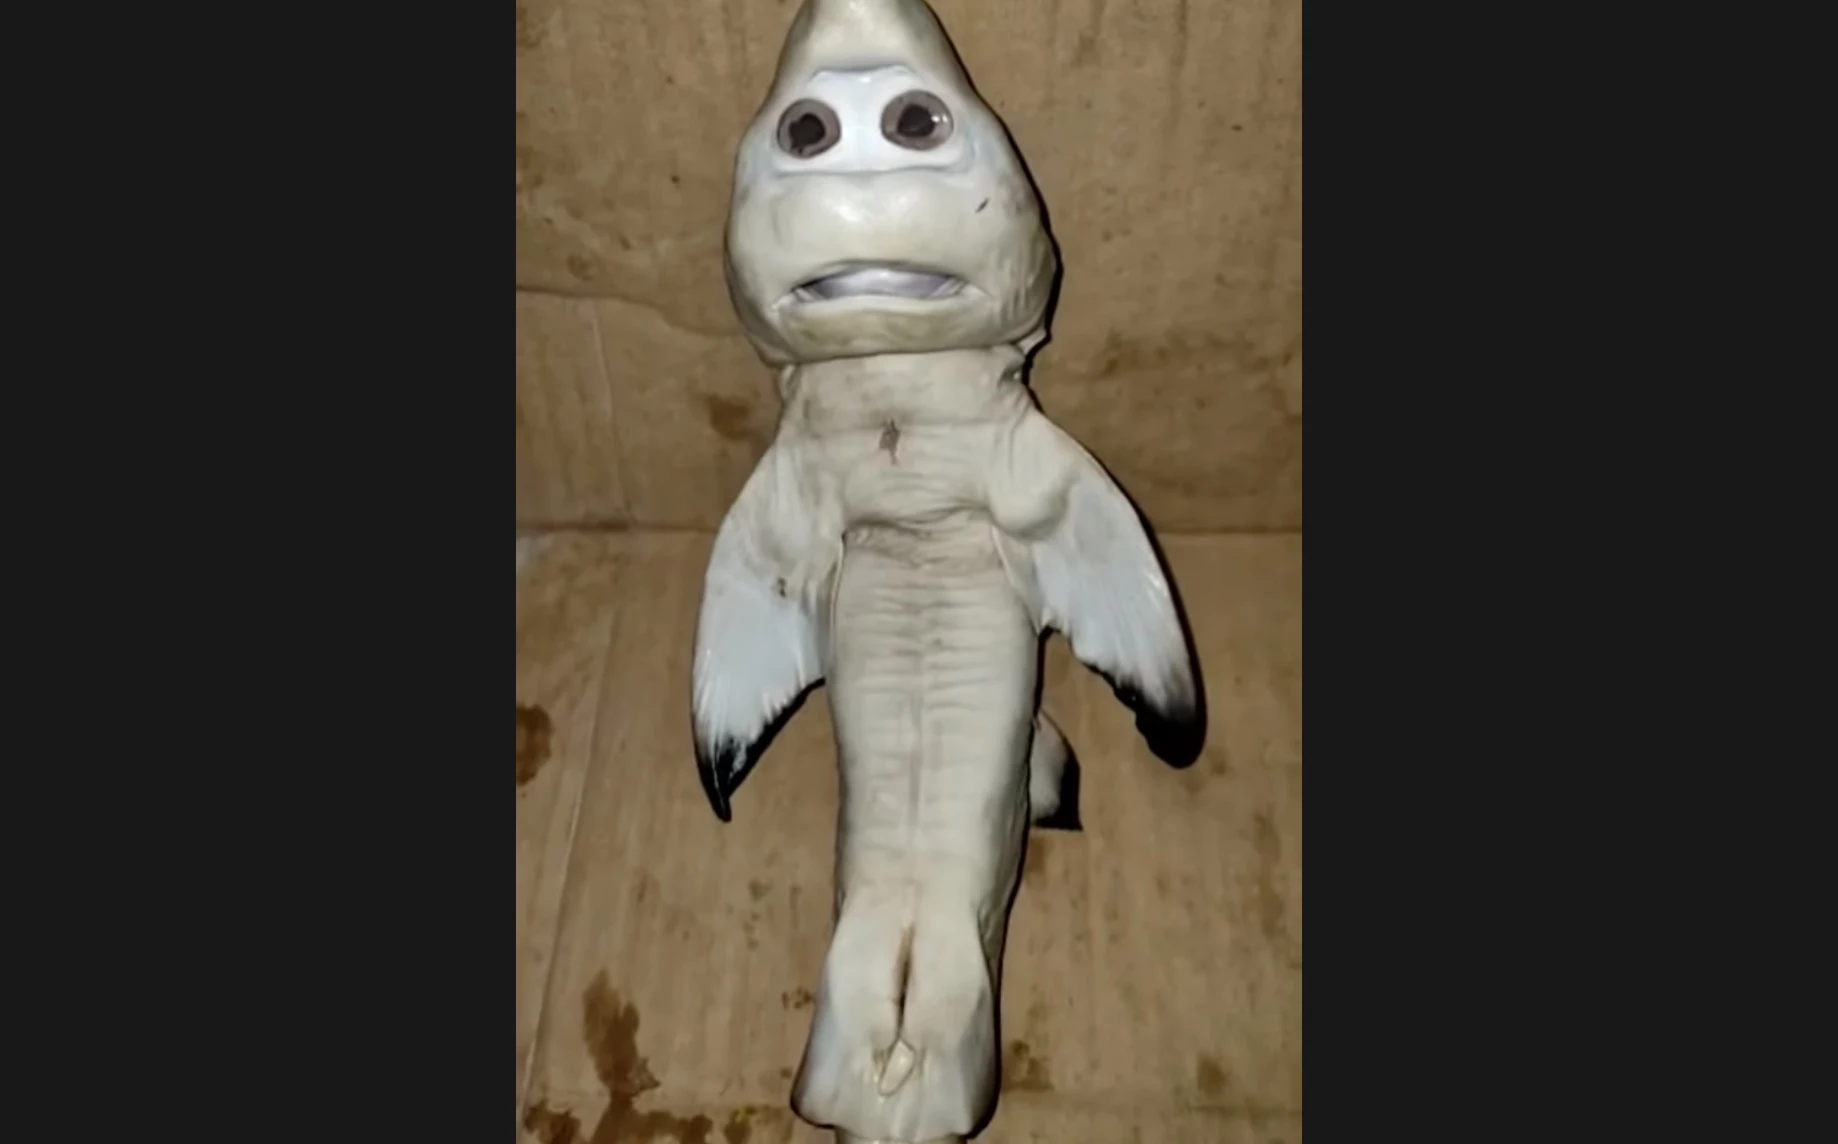 Baby shark with a 'human' face 